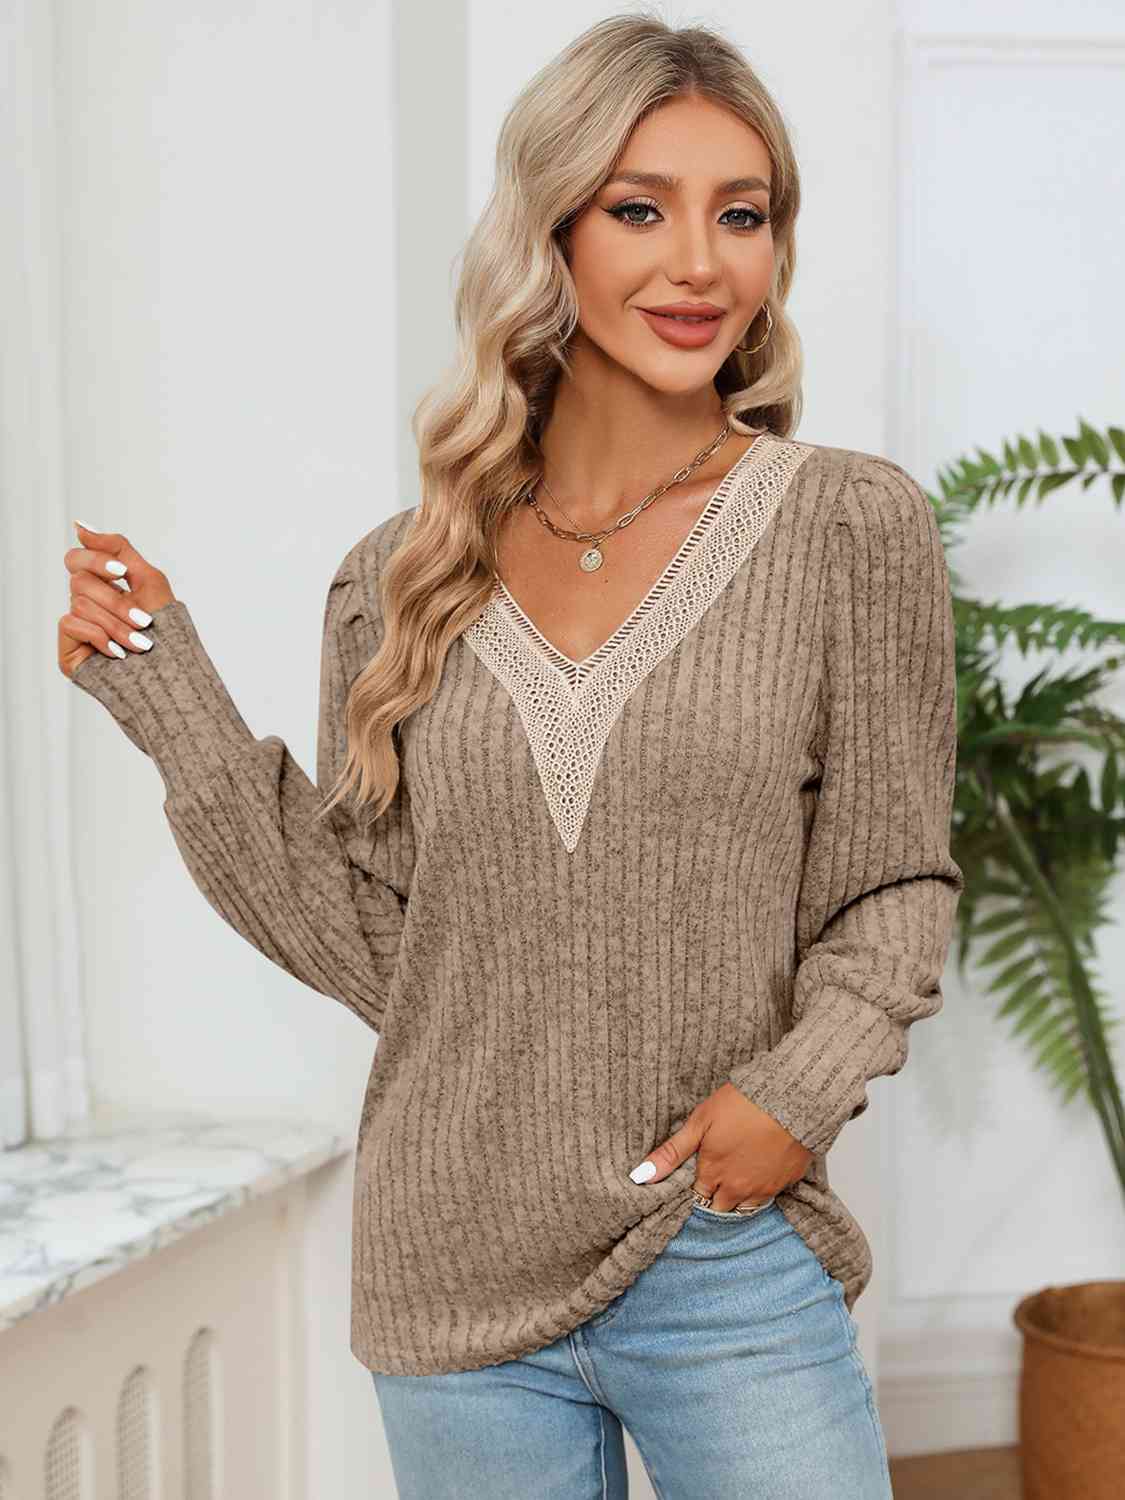 Lace Detail V-Neck Ribbed Blouse - Khaki / S - Women’s Clothing & Accessories - Shirts & Tops - 10 - 2024